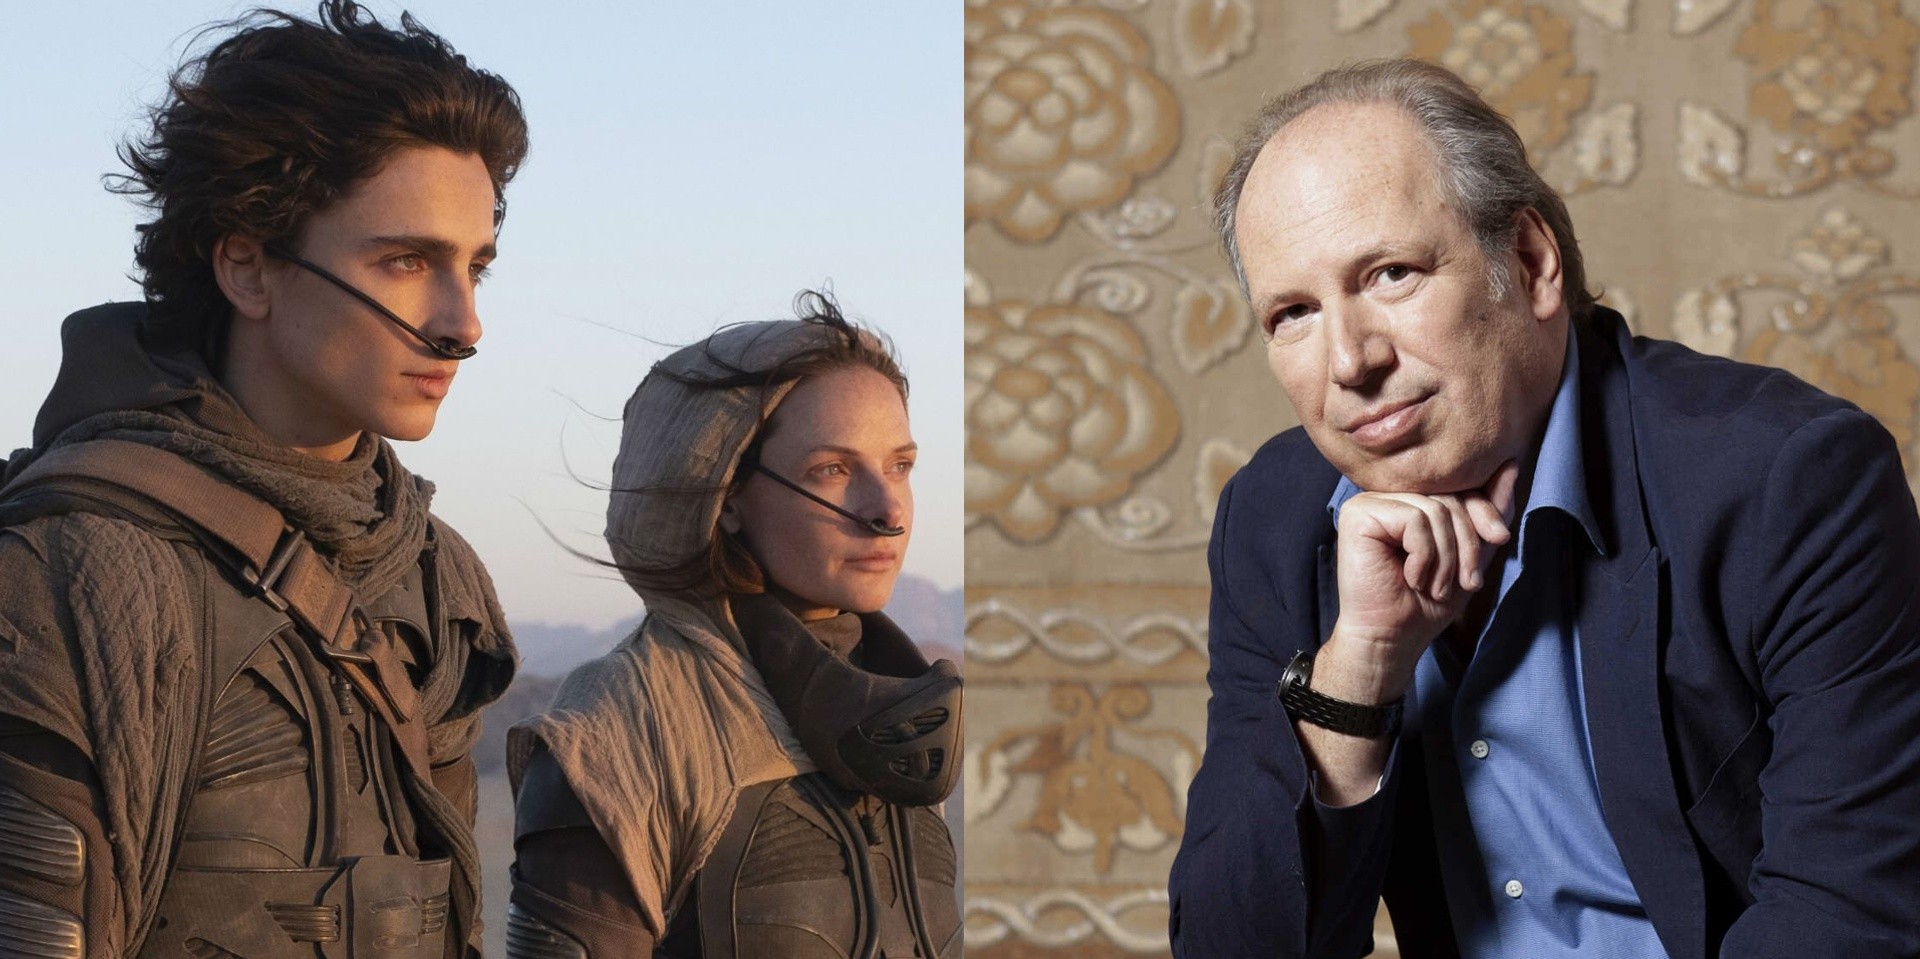 "This is a childhood dream come true for me": Hans Zimmer on Pink Floyd arrangement for the new Dune trailer